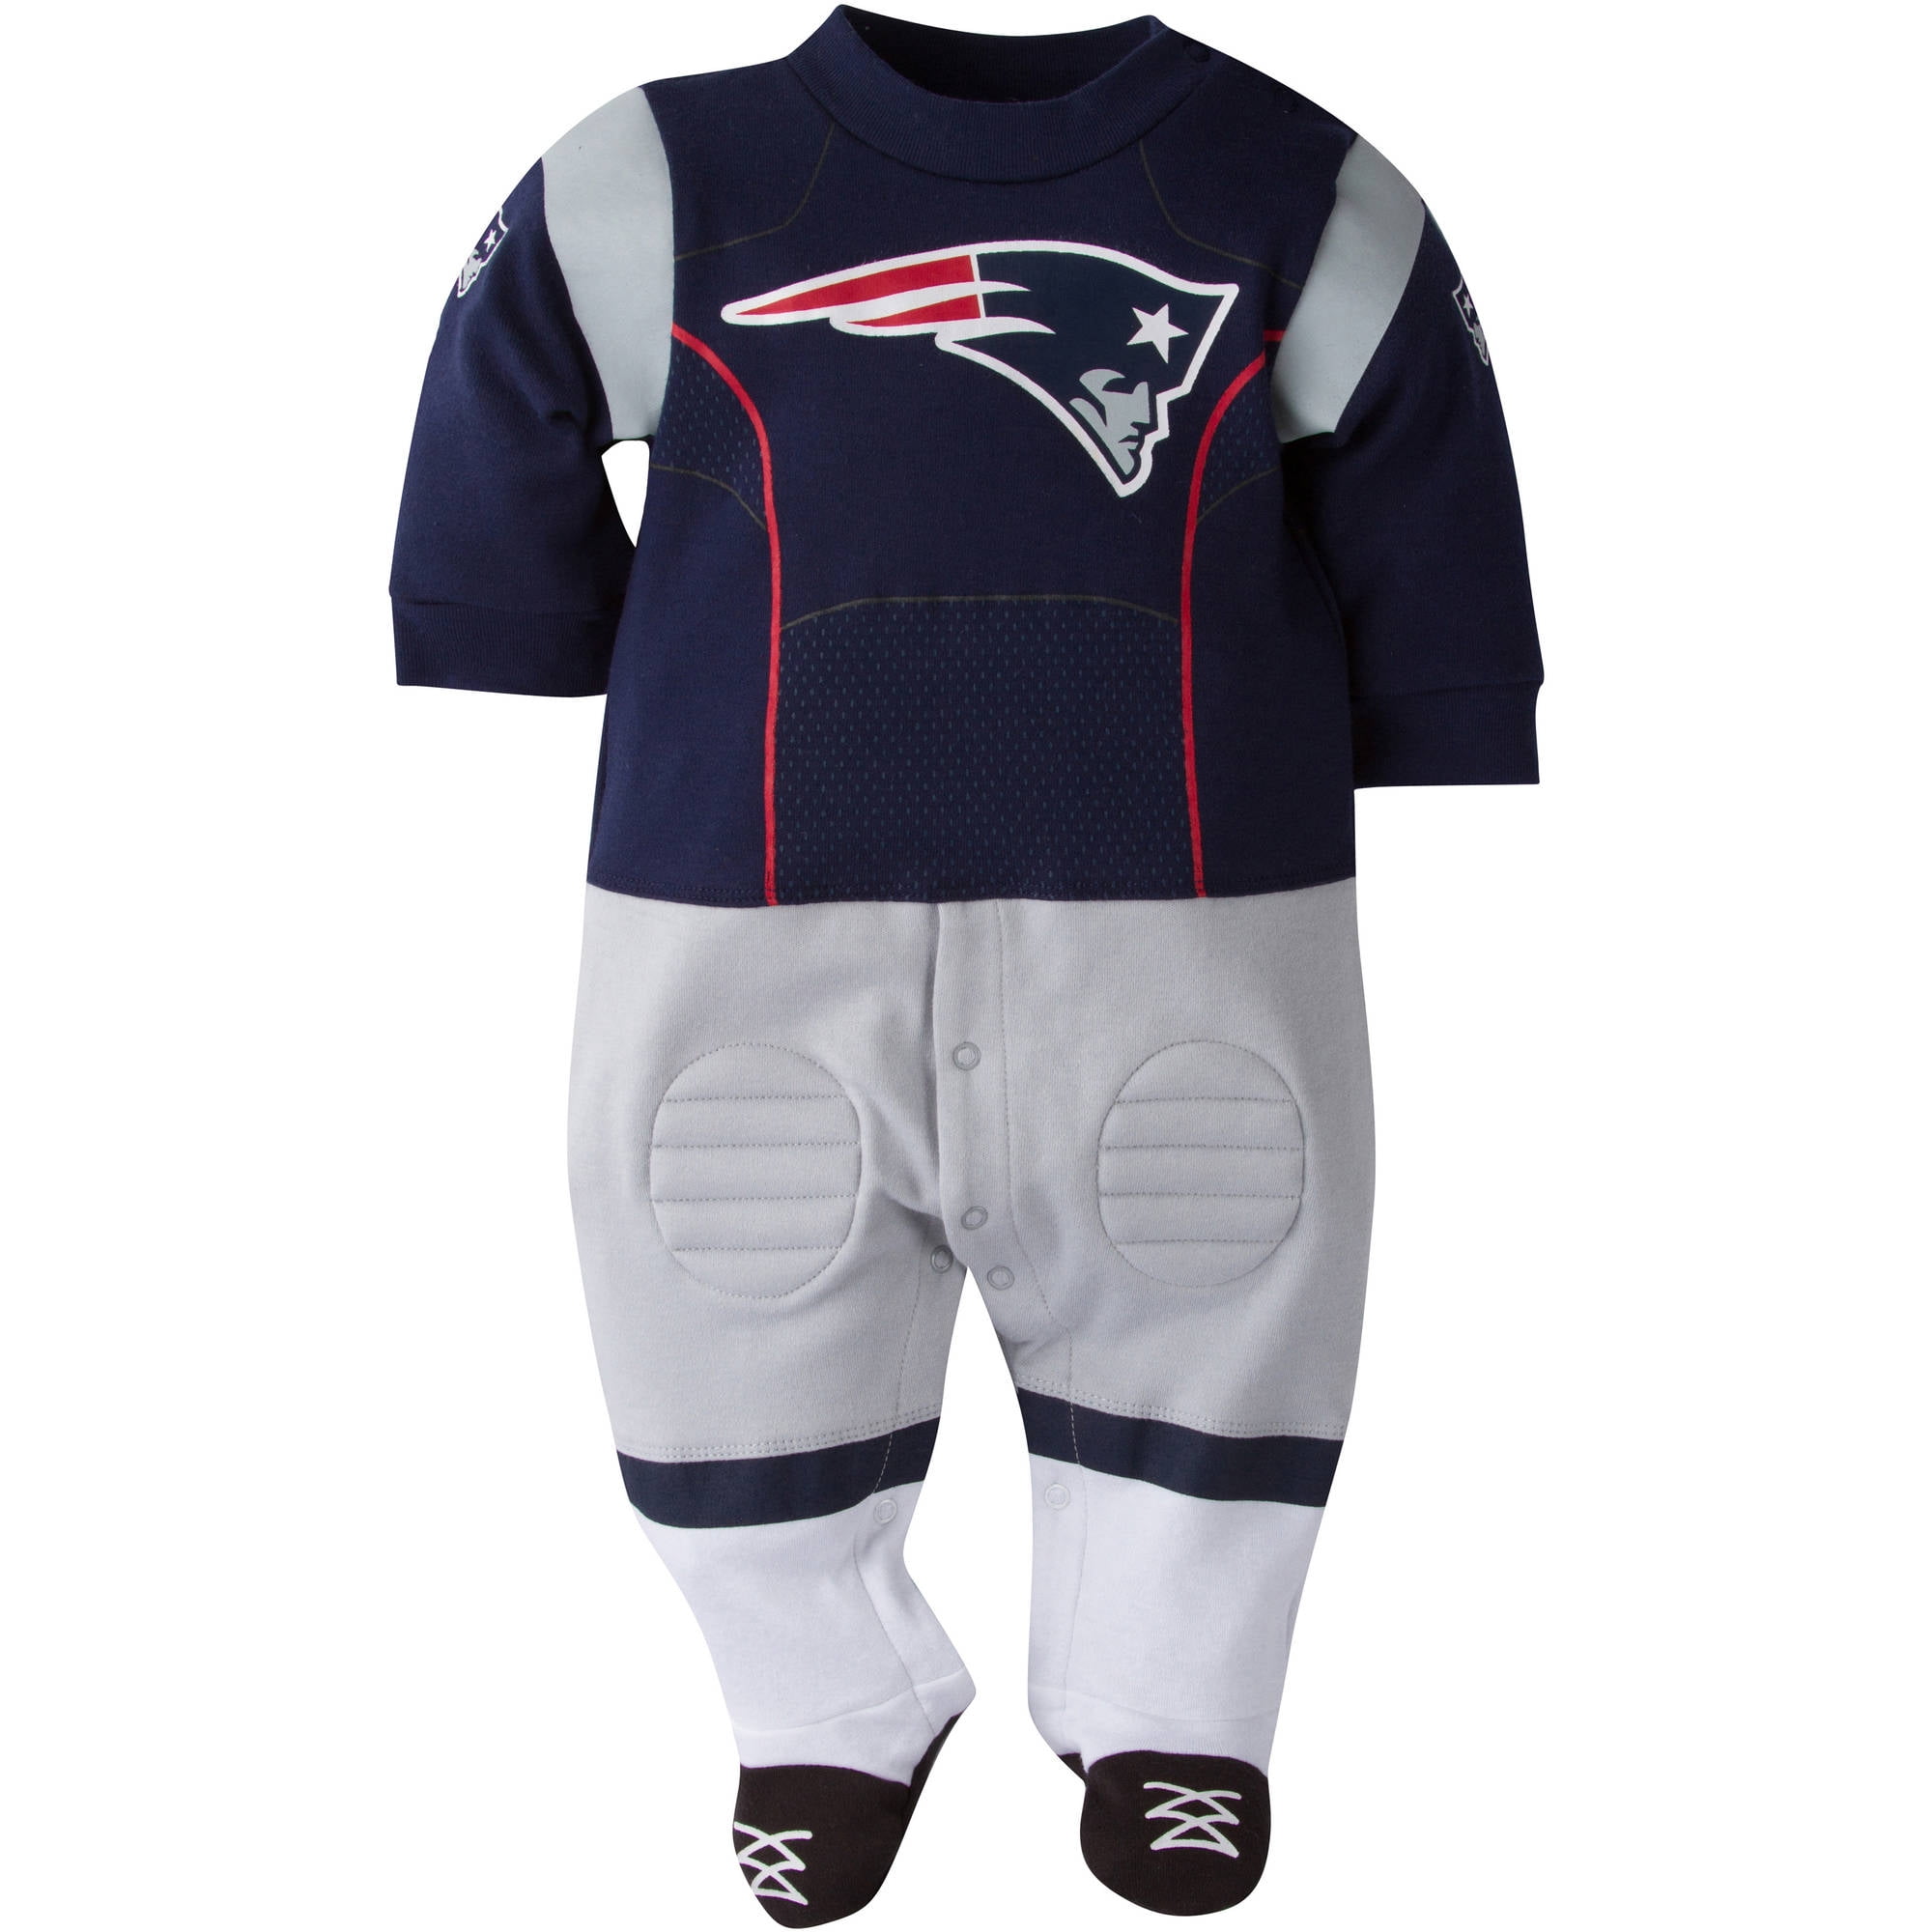 NFL New England Patriots Baby Boys Team Uniform Footysuit with Cleats 